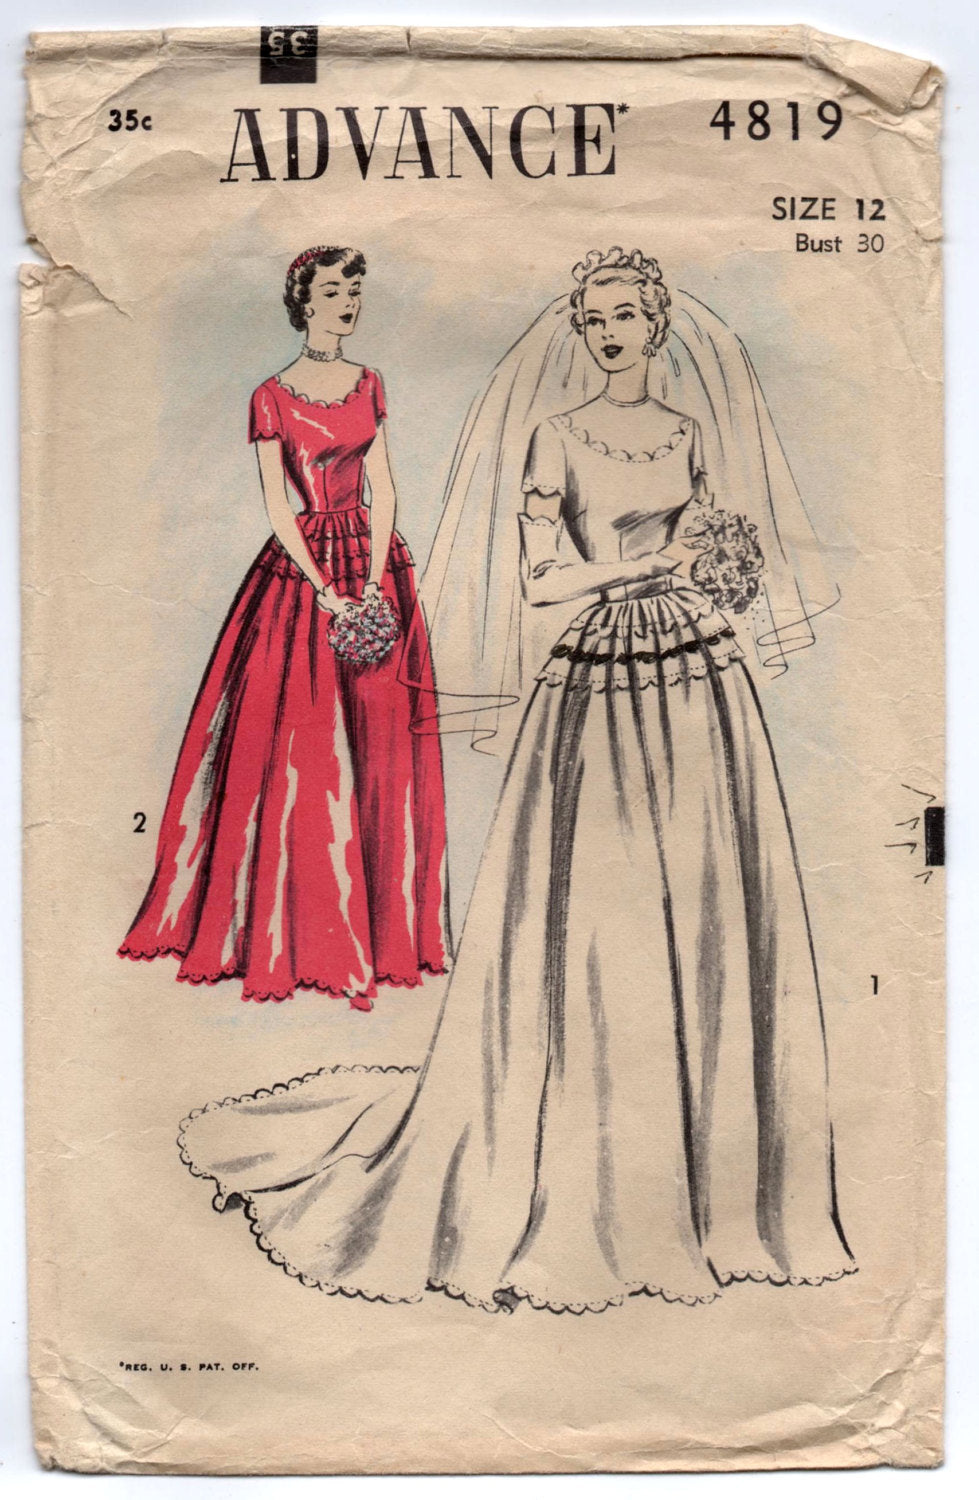 1950's Advance Wedding Dress with Scooped Scallop Neckline and Glove pattern - Bust 30